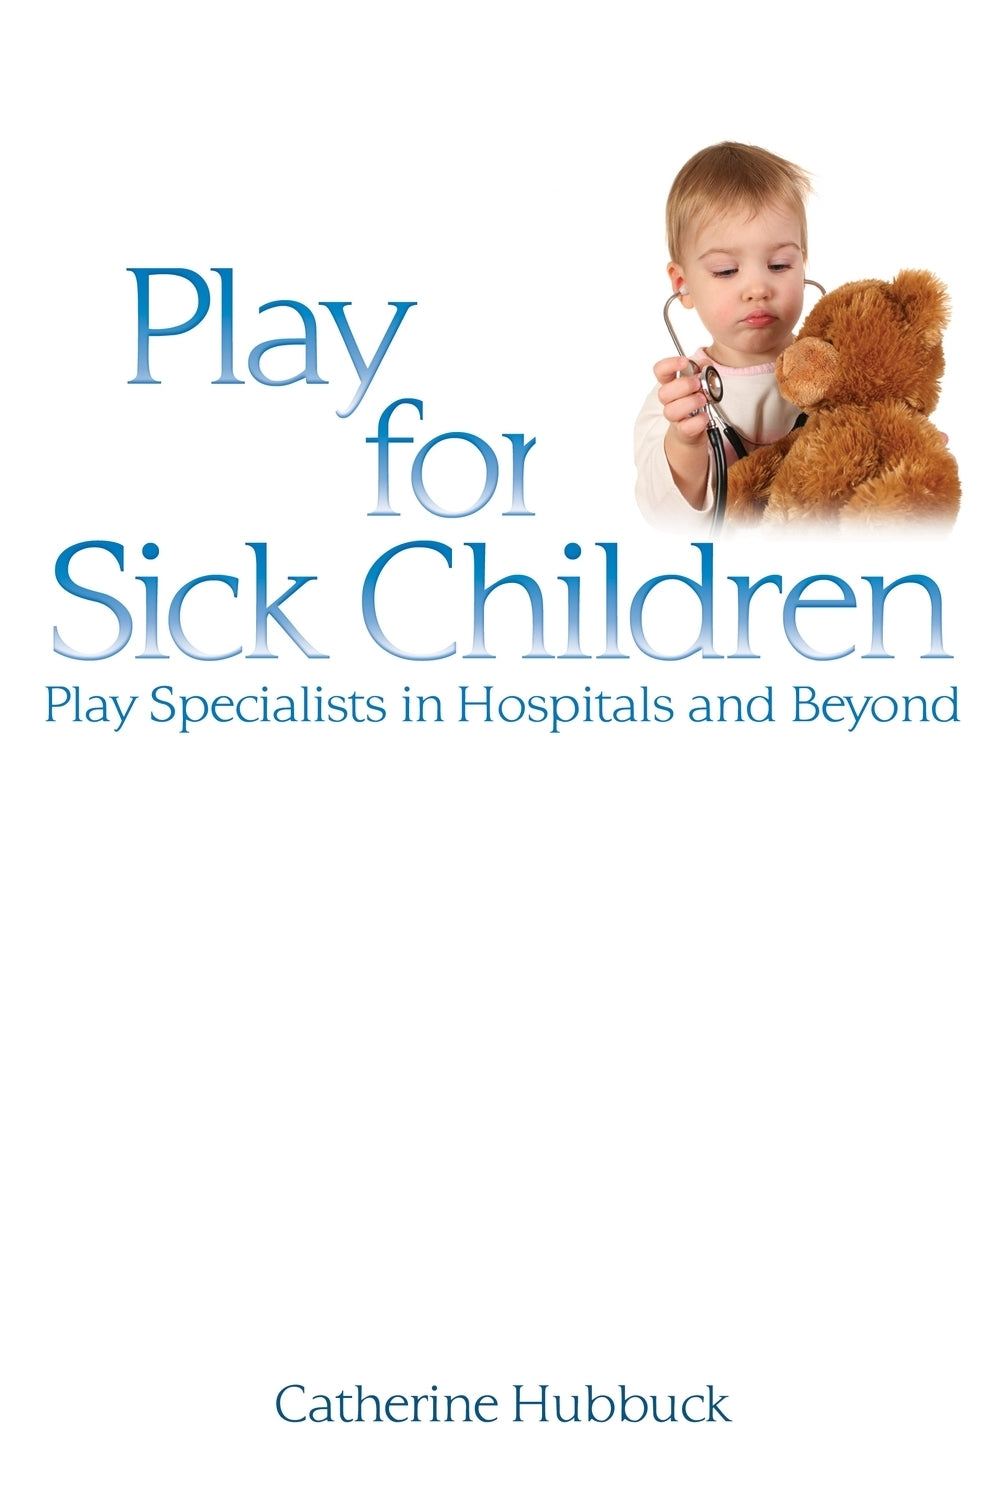 Play for Sick Children by Cath Hubbuck